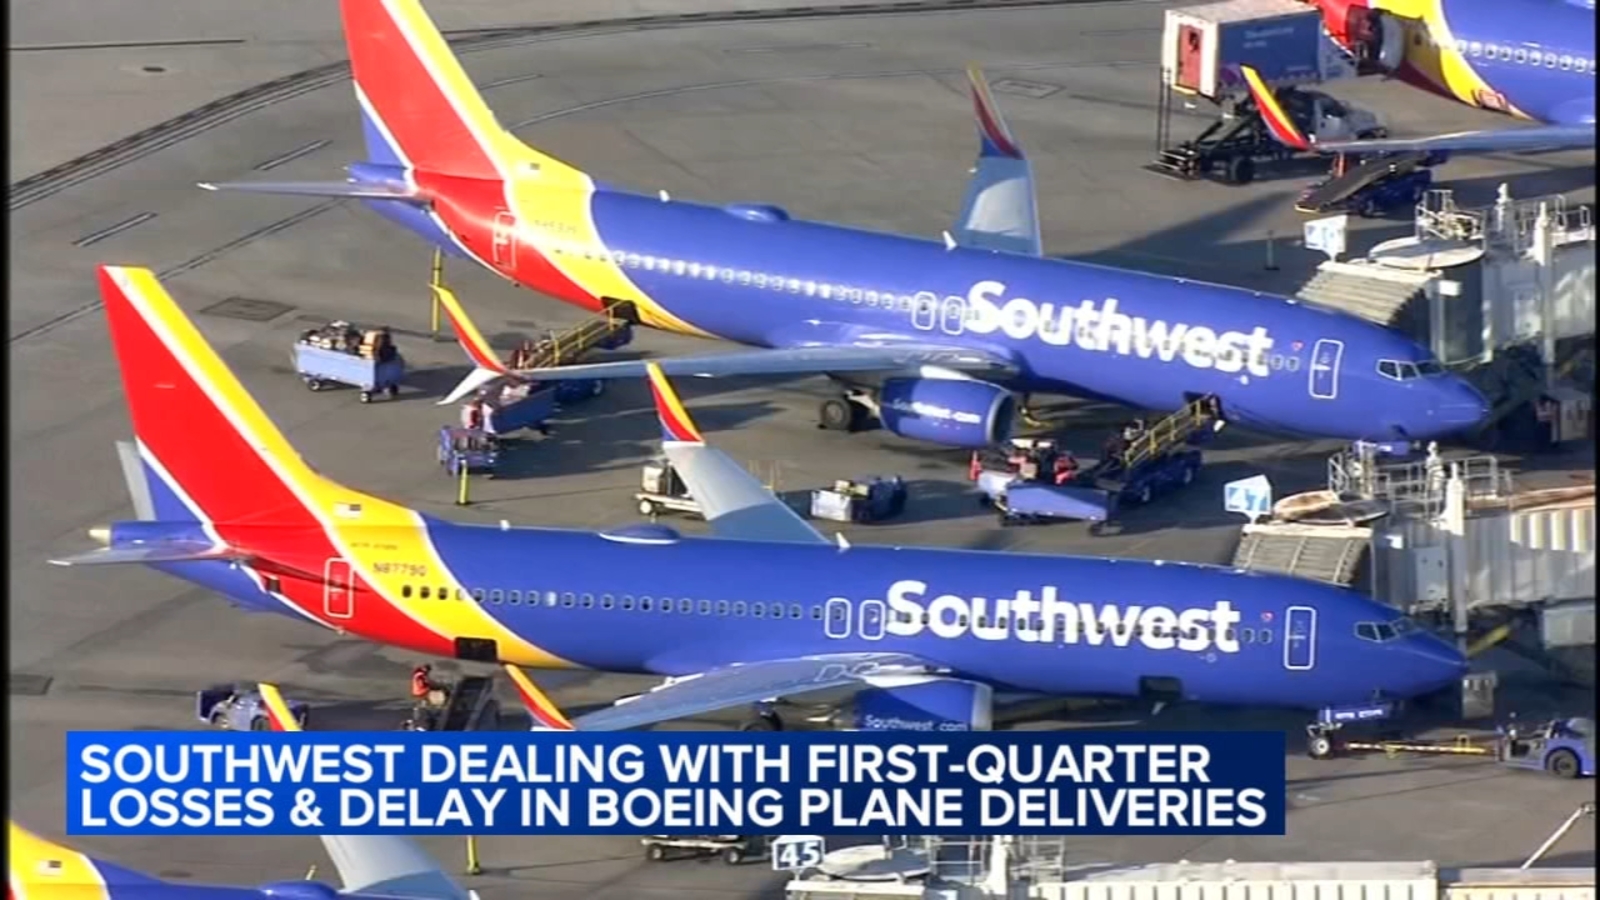 Southwest will limit hiring and drop 4 airports after posting 1st quarter revenue loss; American Airlines posts 1Q loss as well [Video]